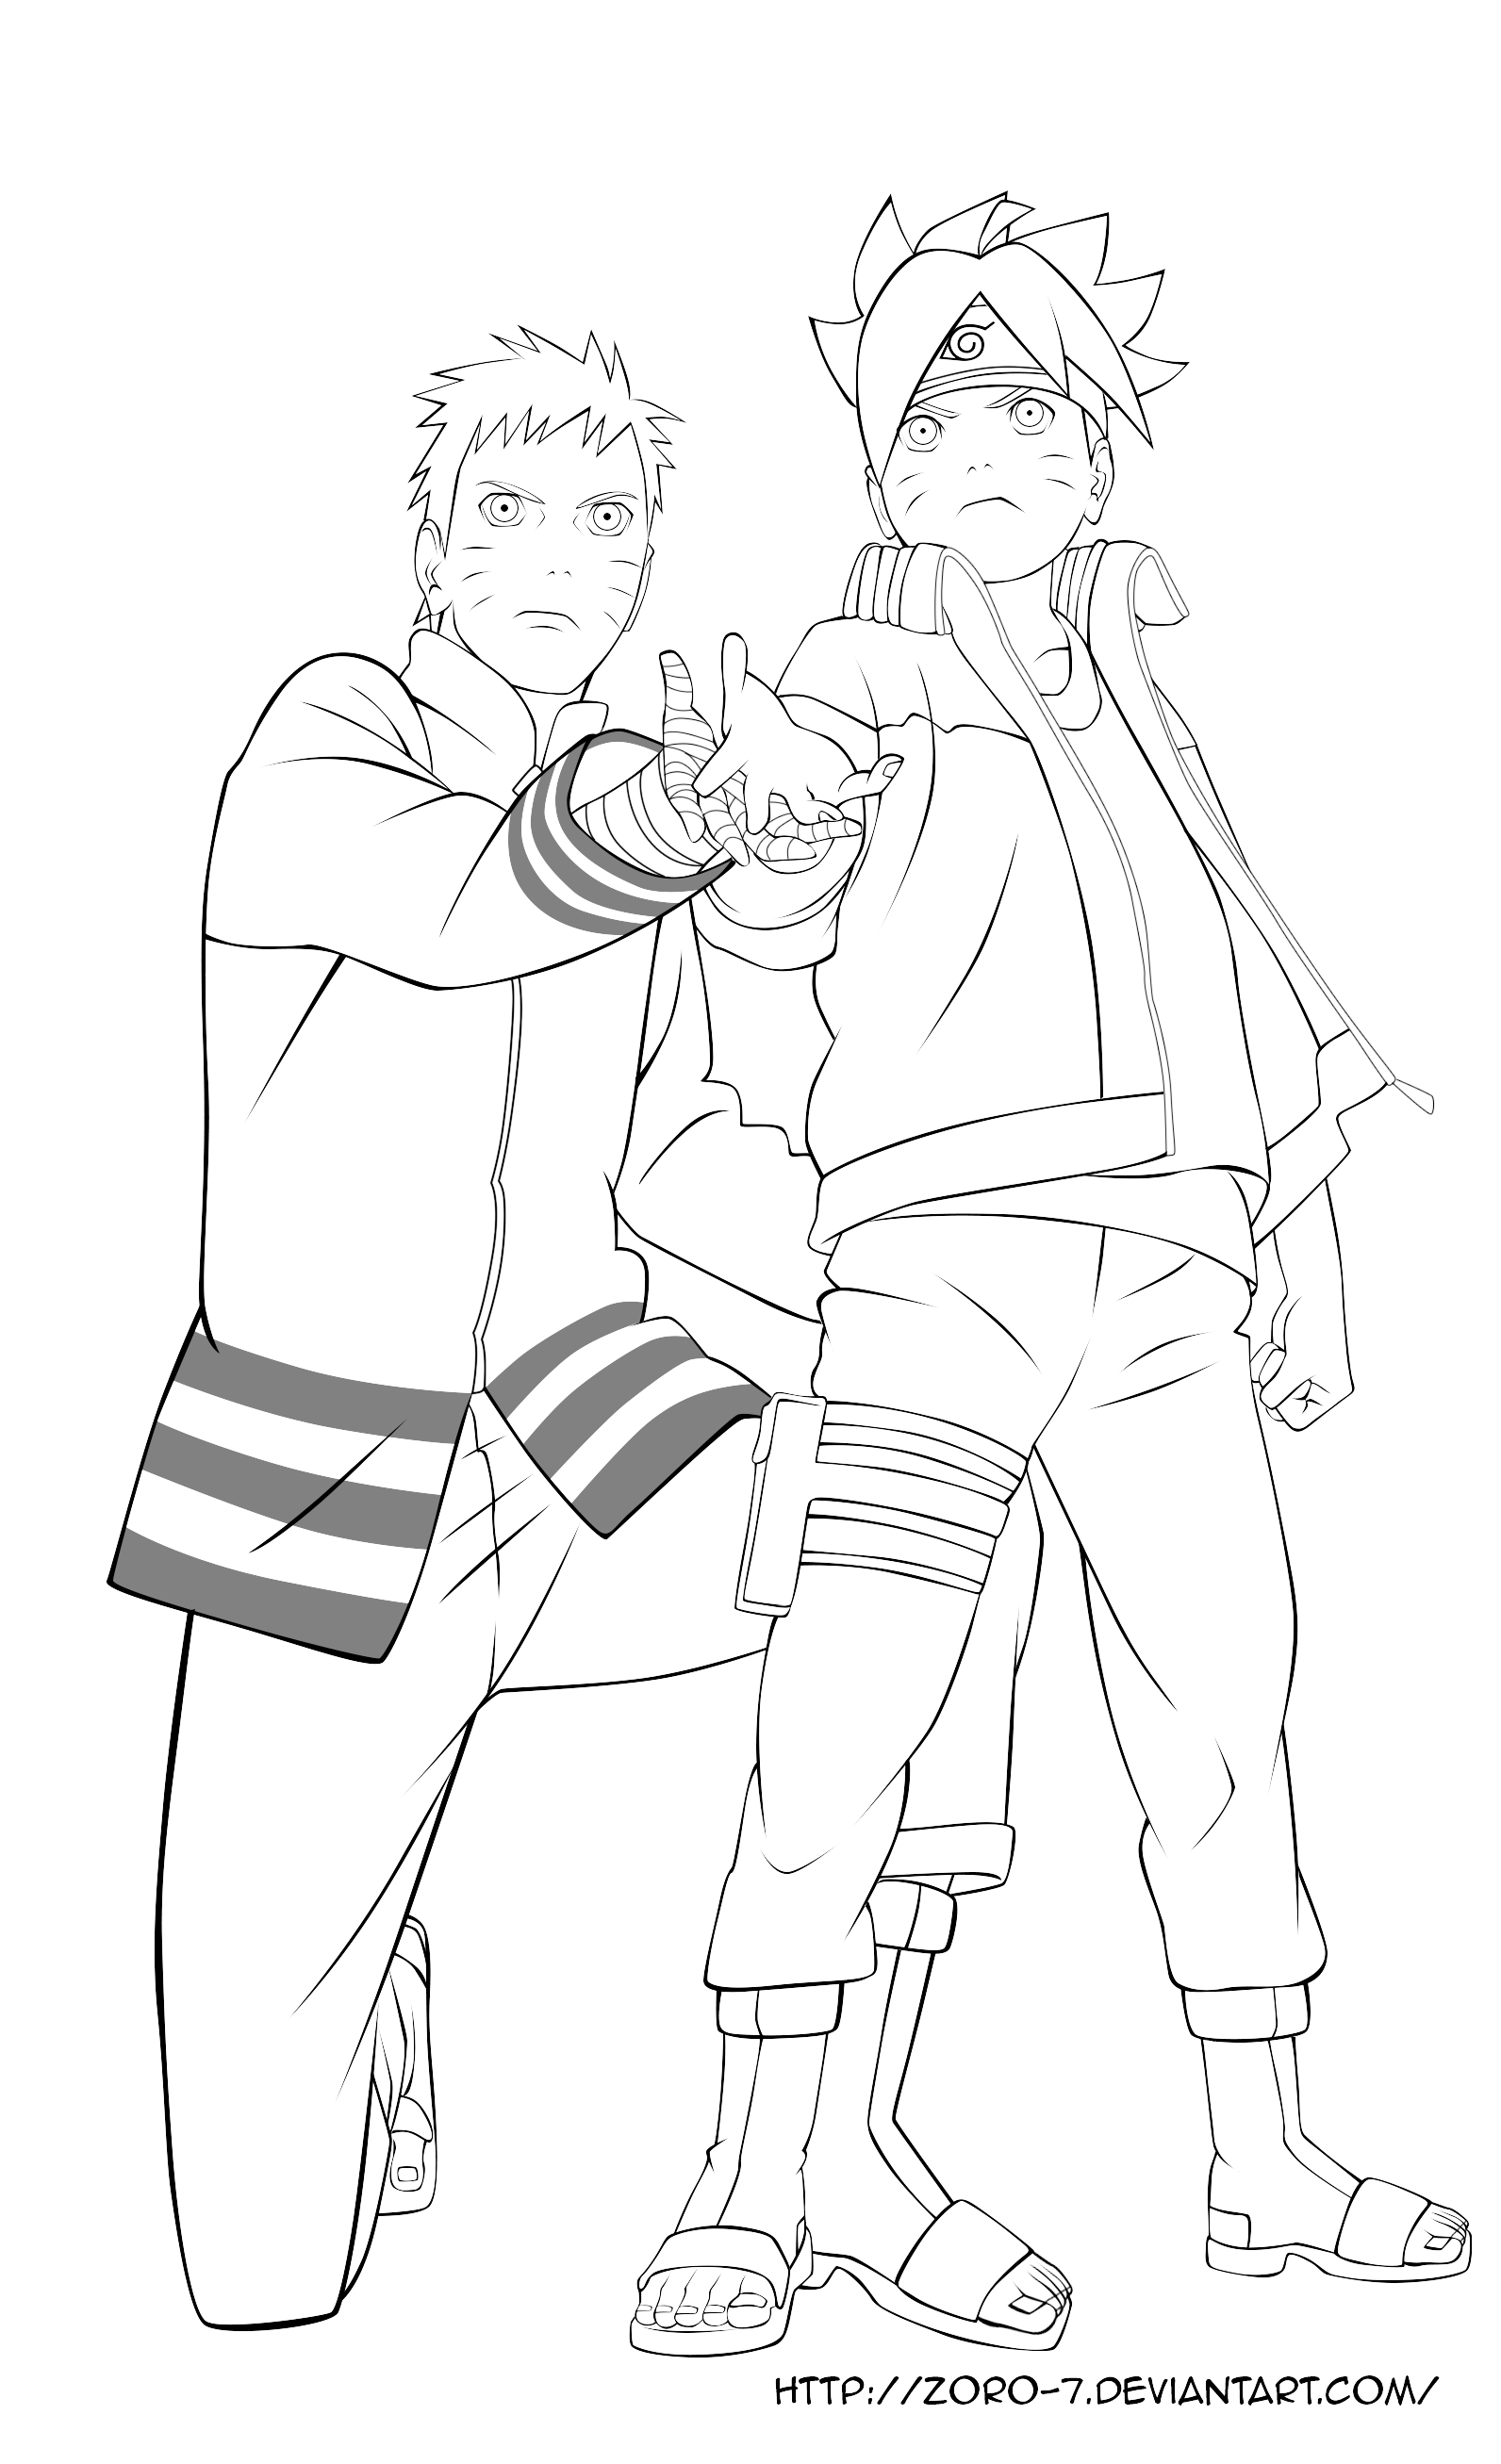 Naruto Coloring Pages Devientart - Coloring Home